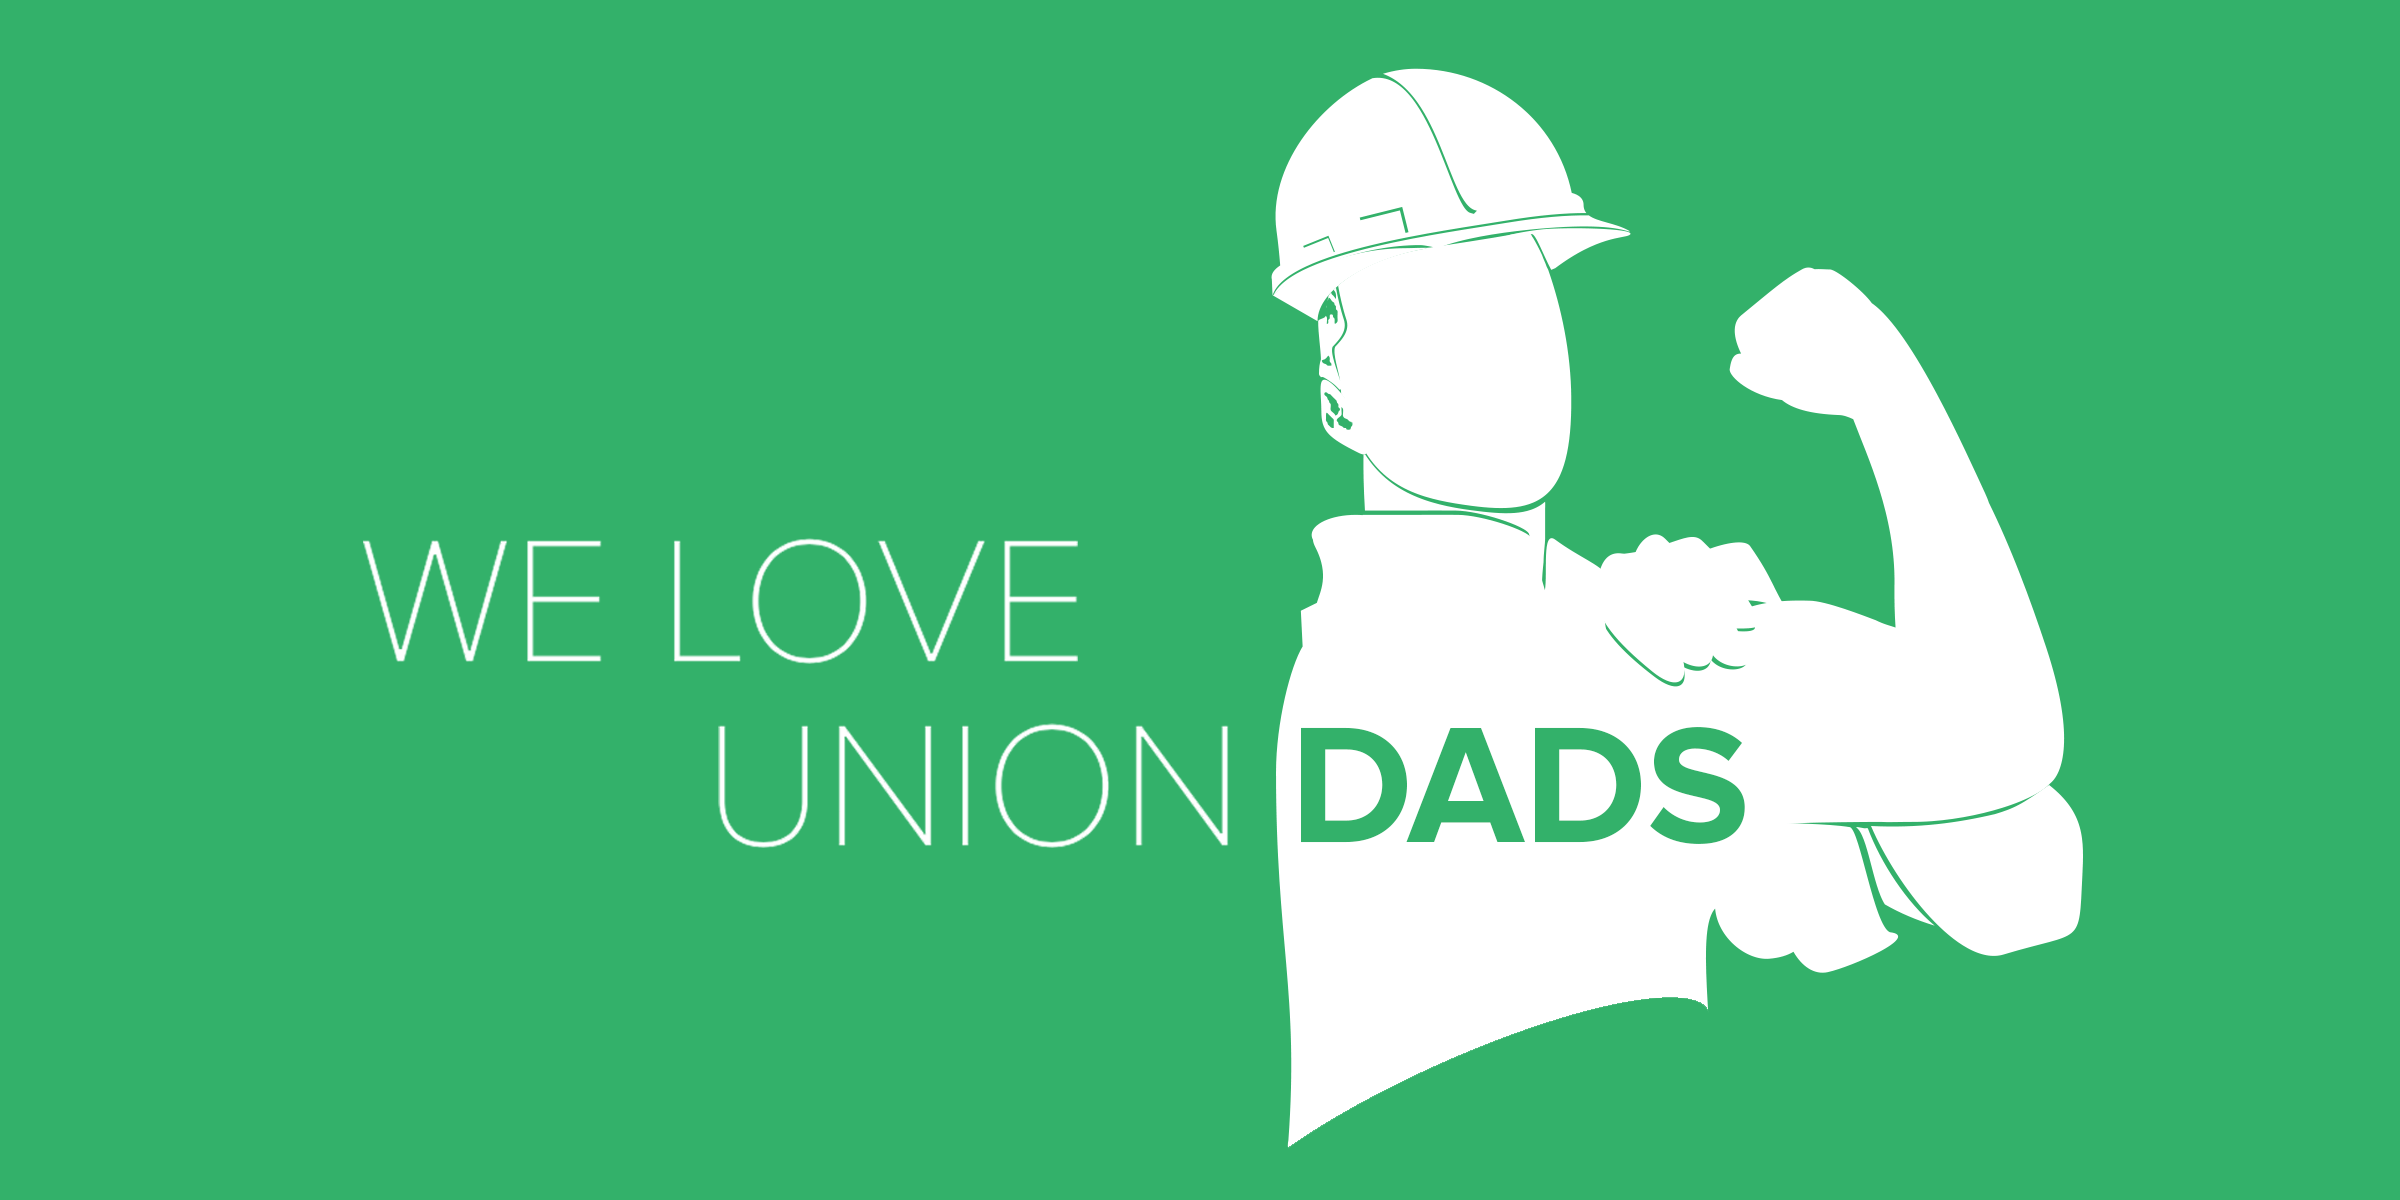 Father’s Day Fun, Sponsored by AFSCME and the Labor Movement